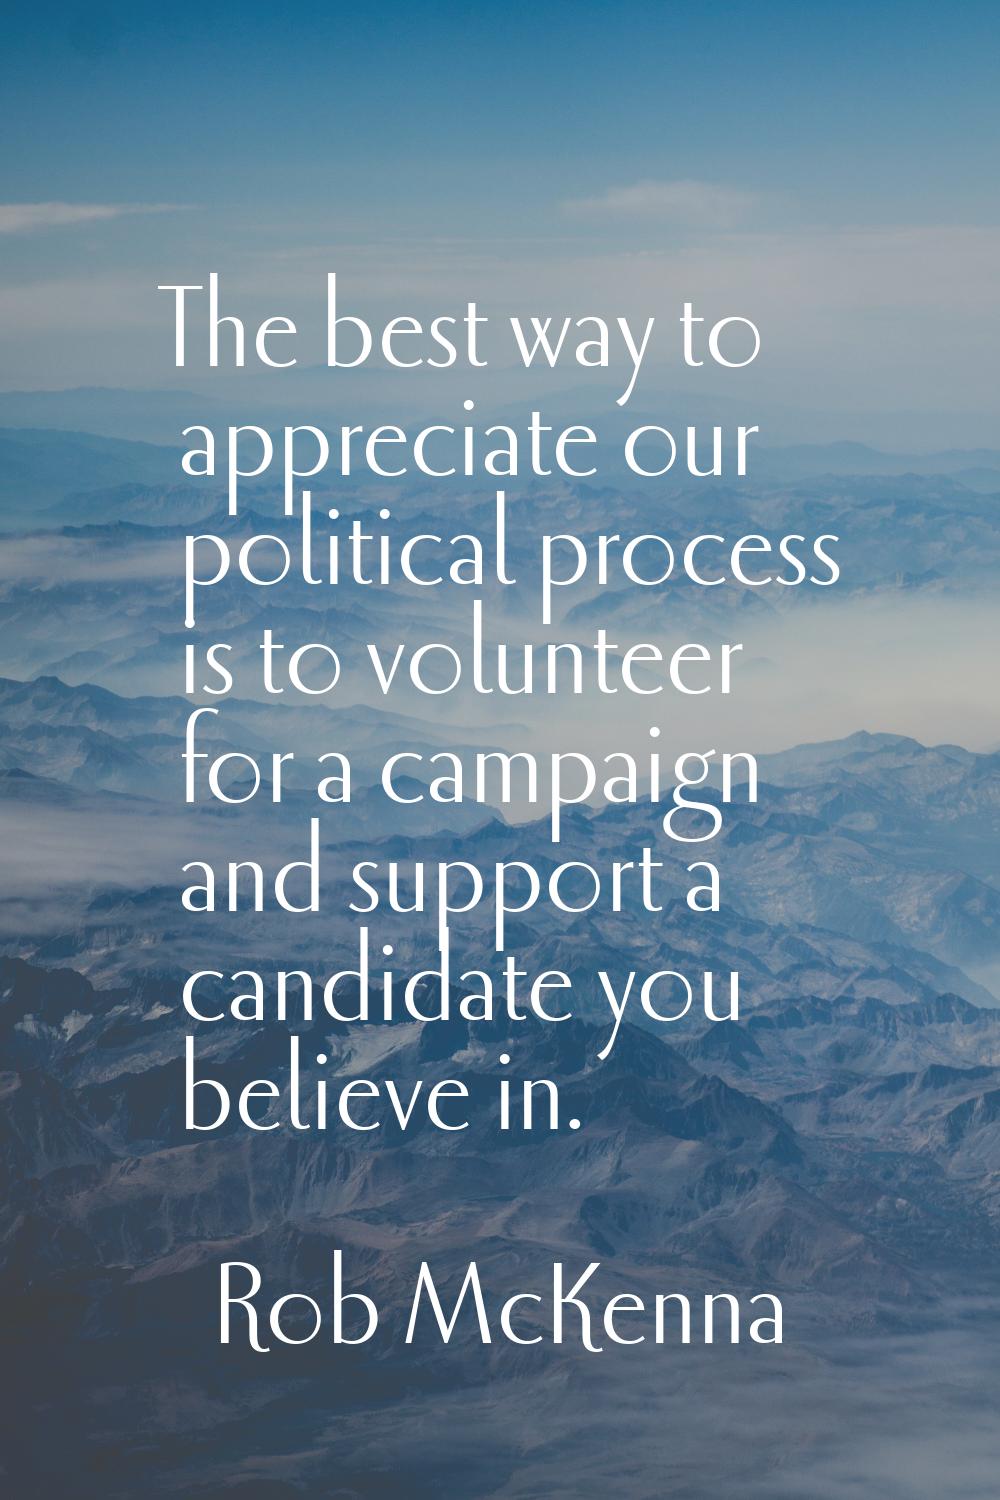 The best way to appreciate our political process is to volunteer for a campaign and support a candi